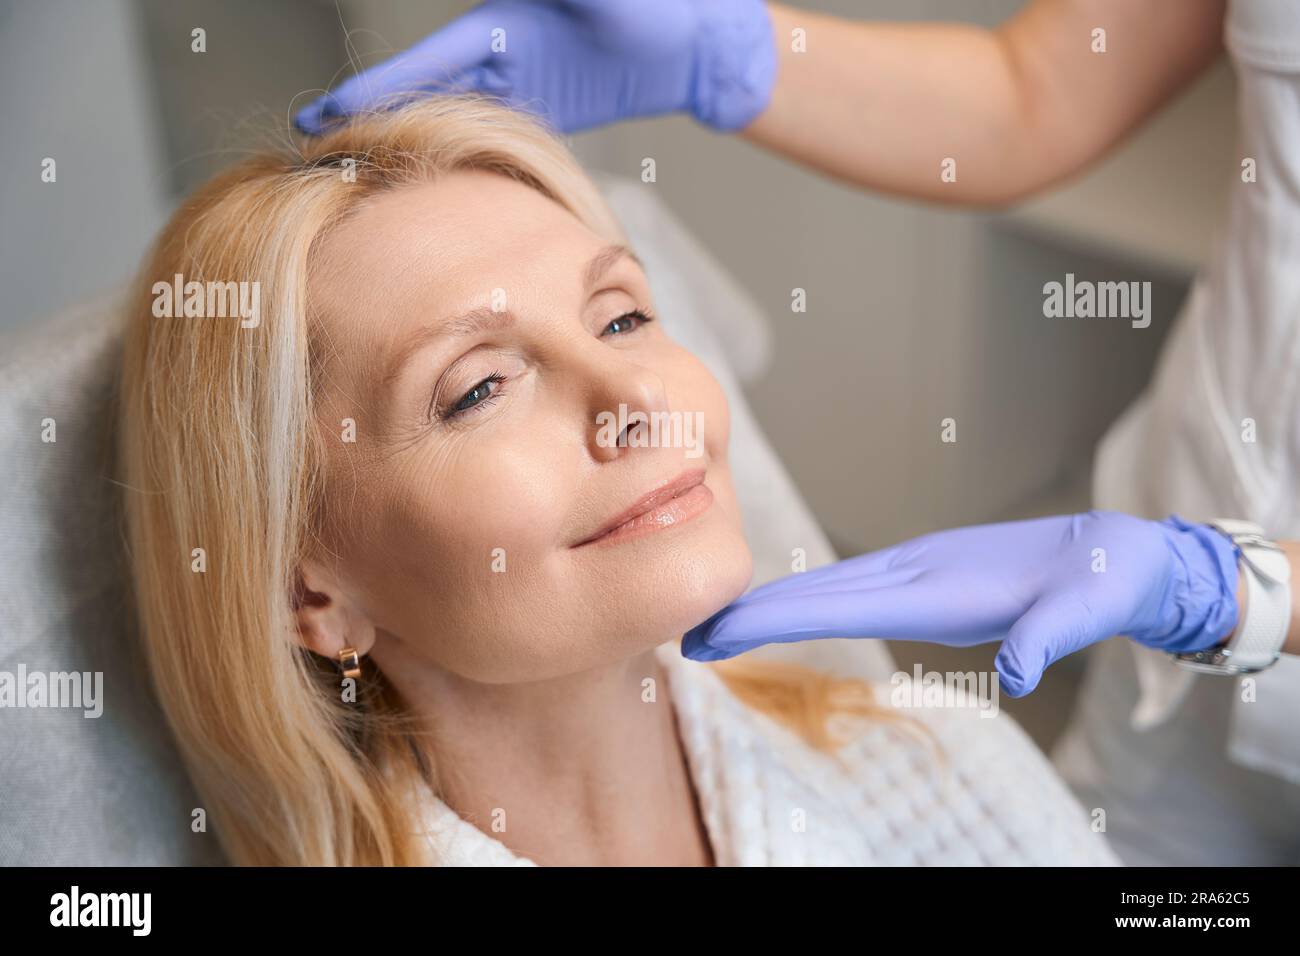 Hands in medical gloves holding happy woman head Stock Photo